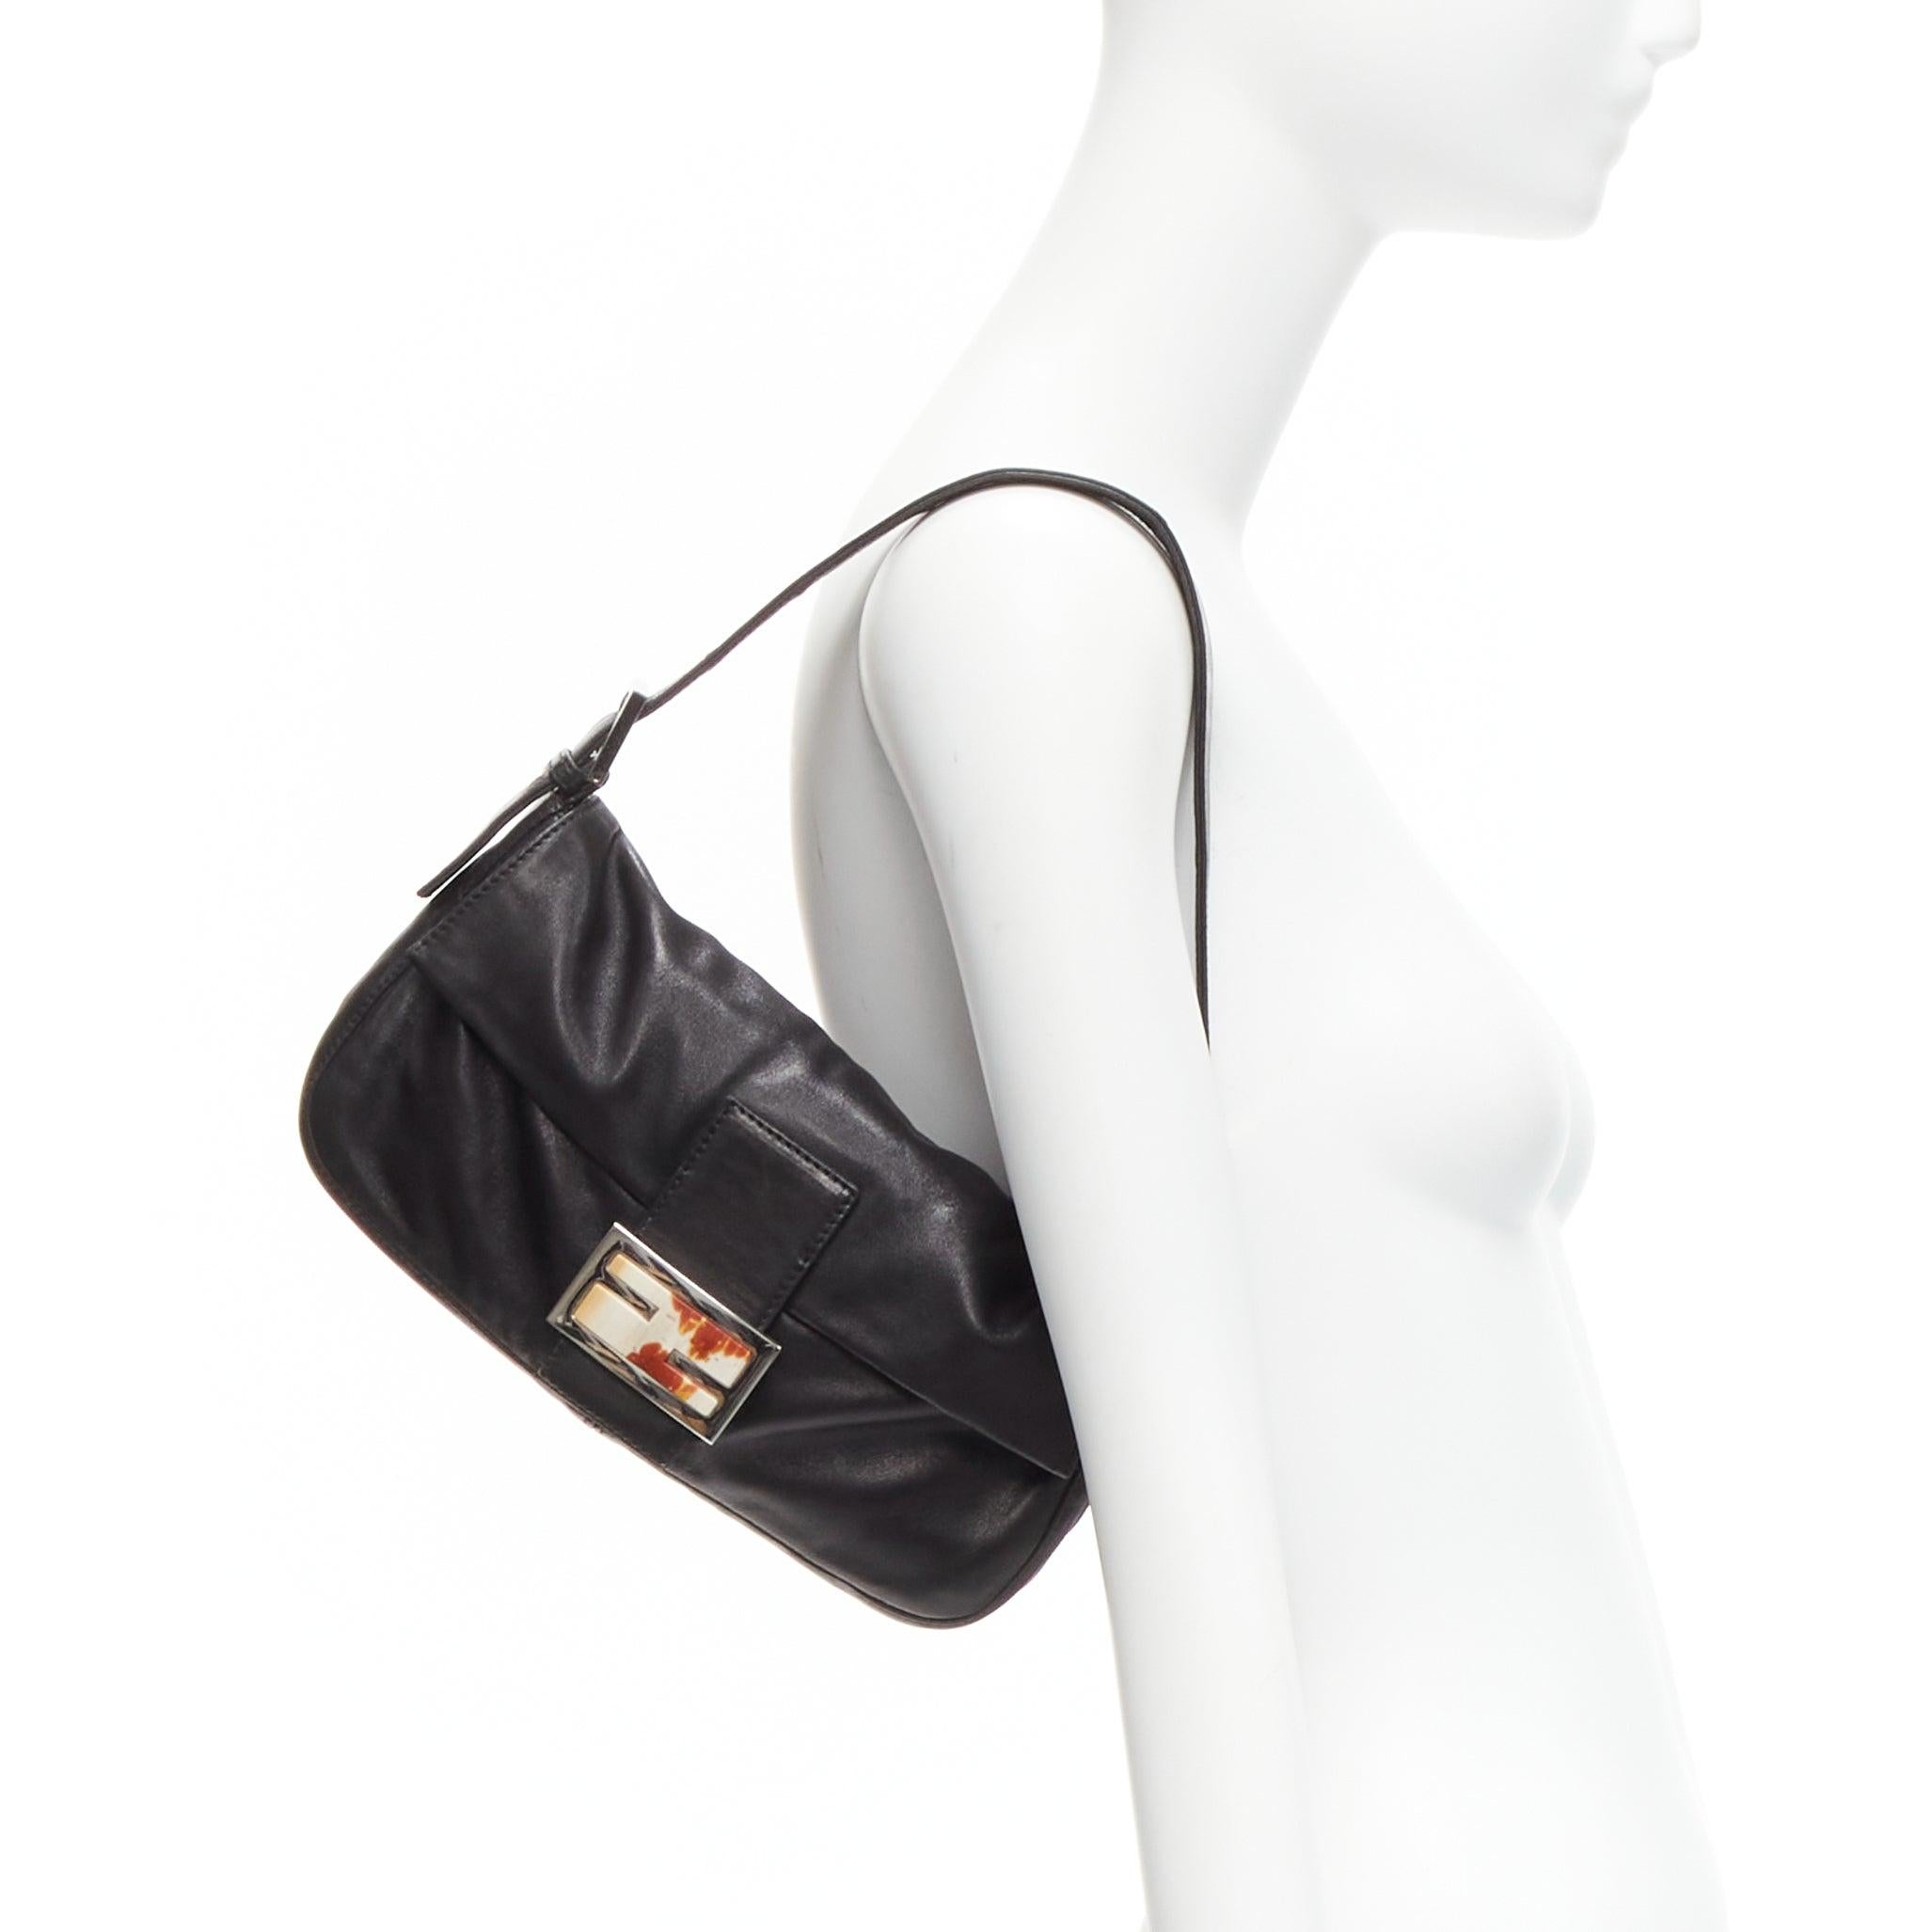 FENDI Baguette black soft nappa leather enamel FF buckle underarm bag
Reference: TGAS/D00804
Brand: Fendi
Model: Baguette
Material: Leather
Color: Black, Multicolour
Pattern: Solid
Closure: Snap Buttons
Lining: Red Fabric
Extra Details: Soft nappa